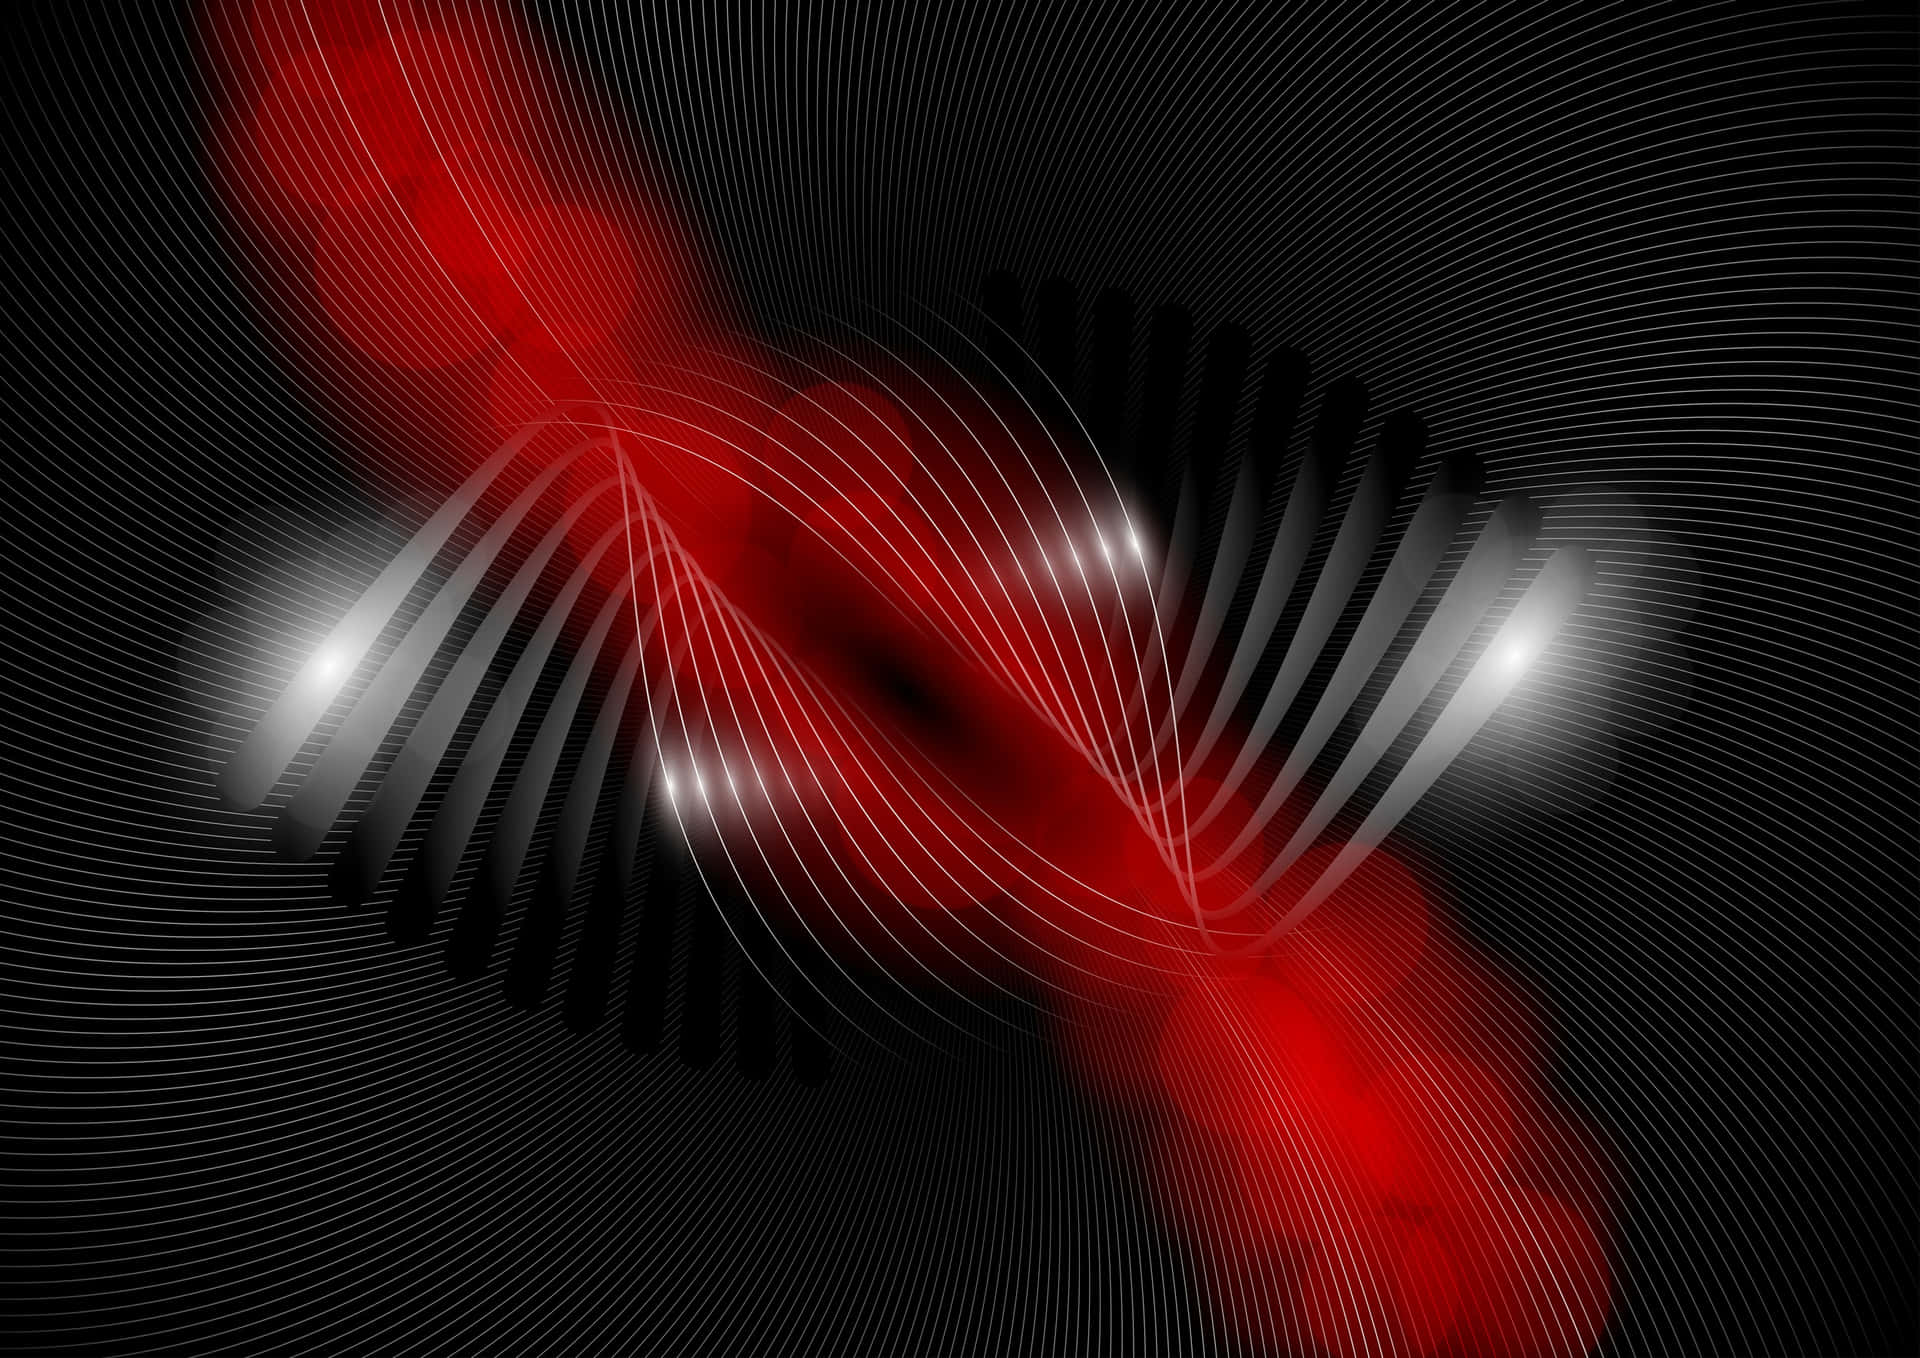 A Red And Black Abstract Background With A Wave